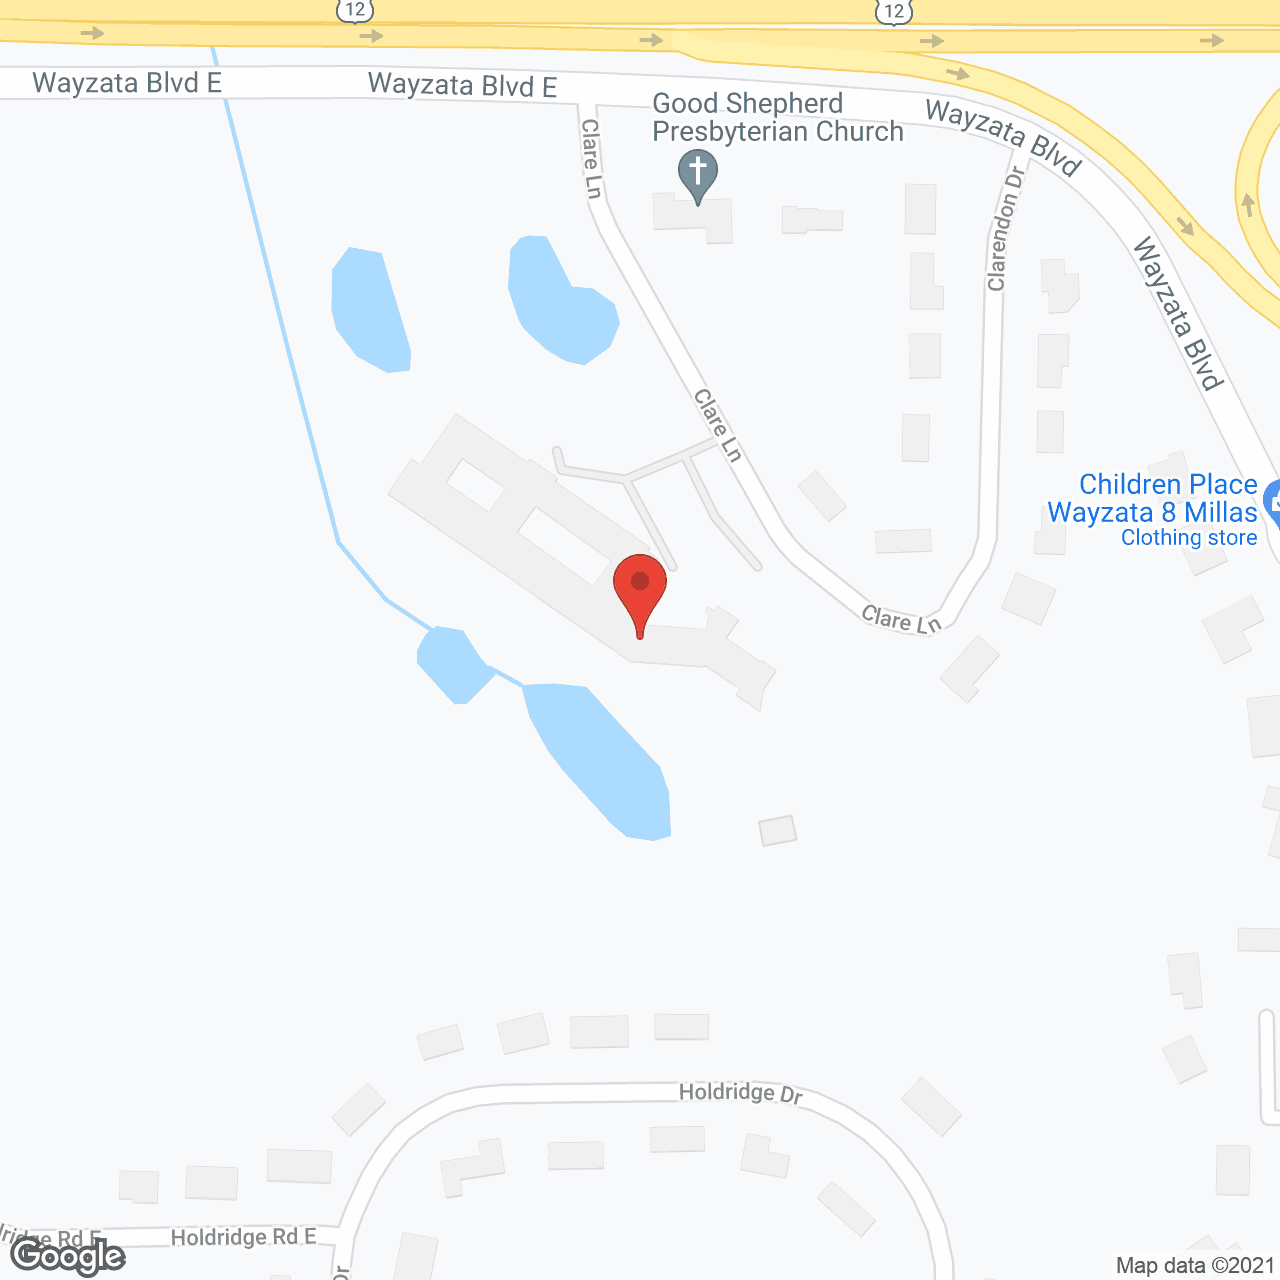 Hillcrest of Wayzata Rehabilitation and Healthcare Center in google map